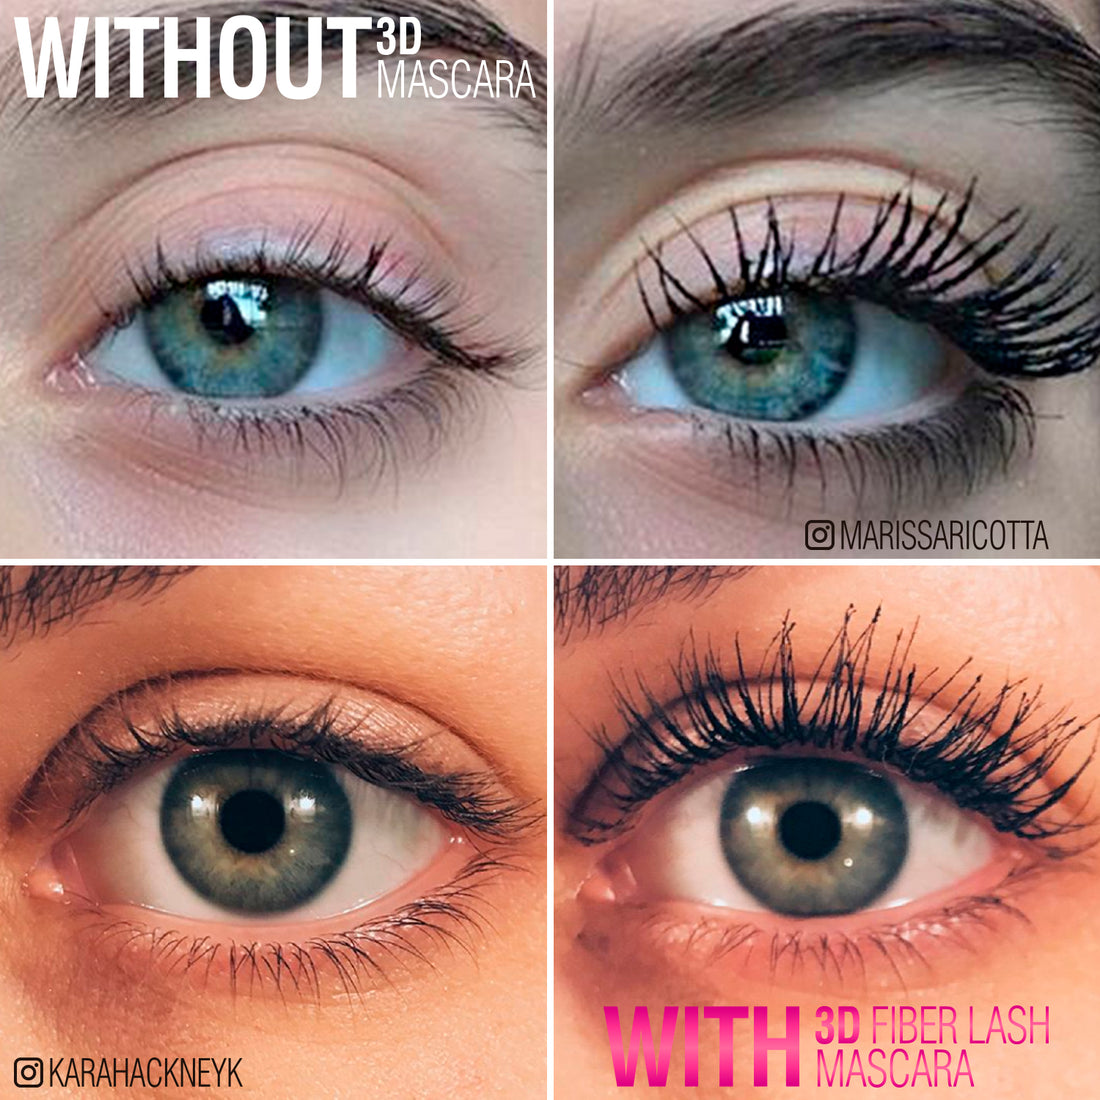 Cheap 3D Fiber Lash Mascara as Last Minute Christmas Gift for People with Short Lashes